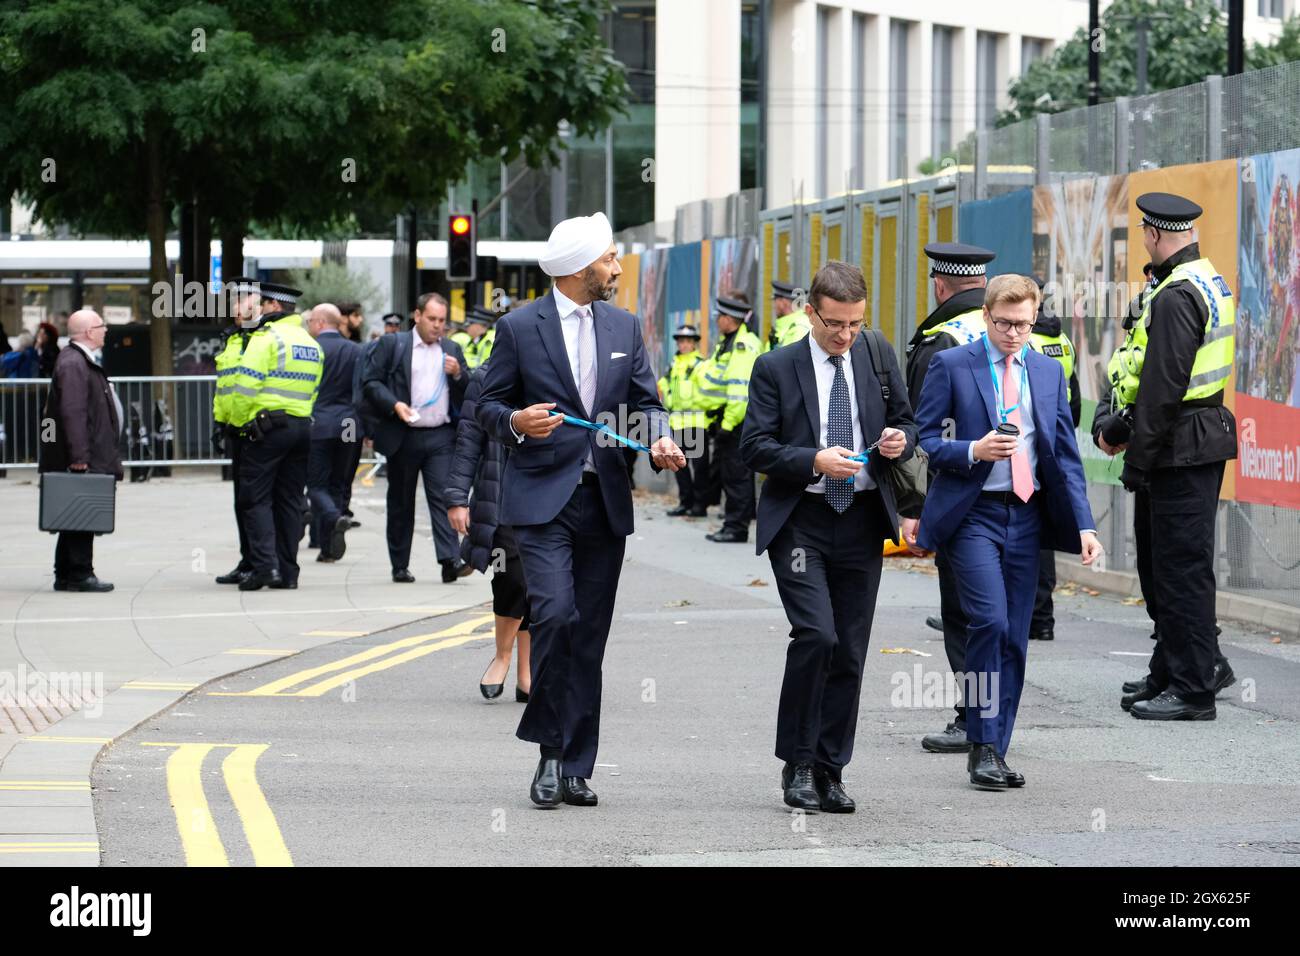 Manchester, UK – Monday 4th October 2021 – Delegates arrive at the Conservative Party Conference in Manchester with a large Police presence. Photo Steven May / Alamy Live News Stock Photo